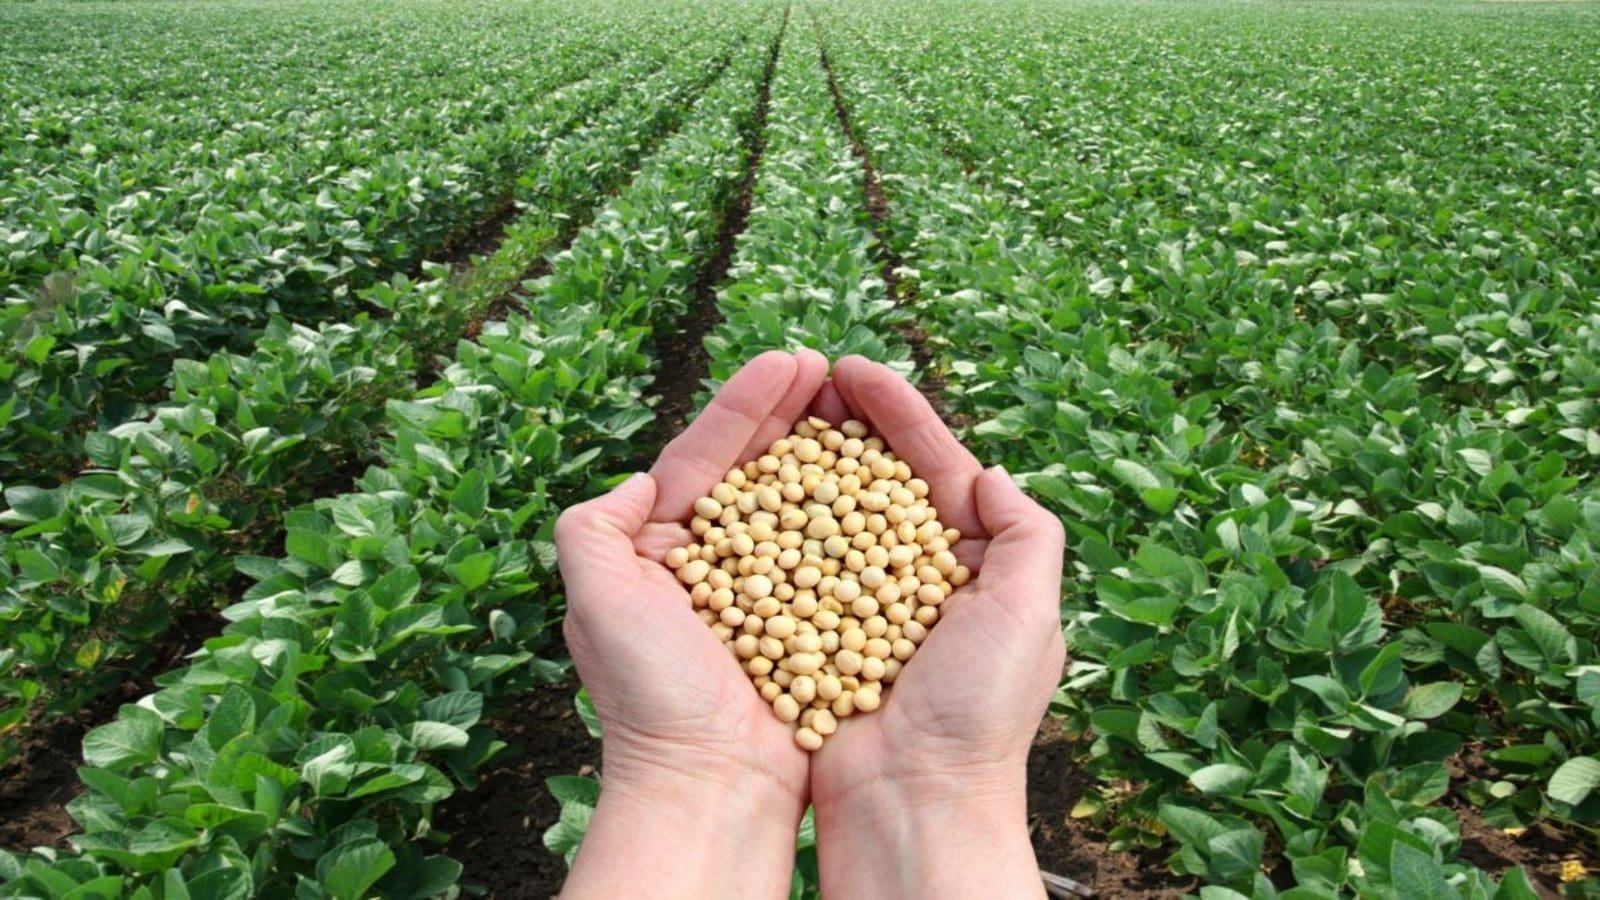 U.S. soybean industry marks 19% reduction in carbon footprint